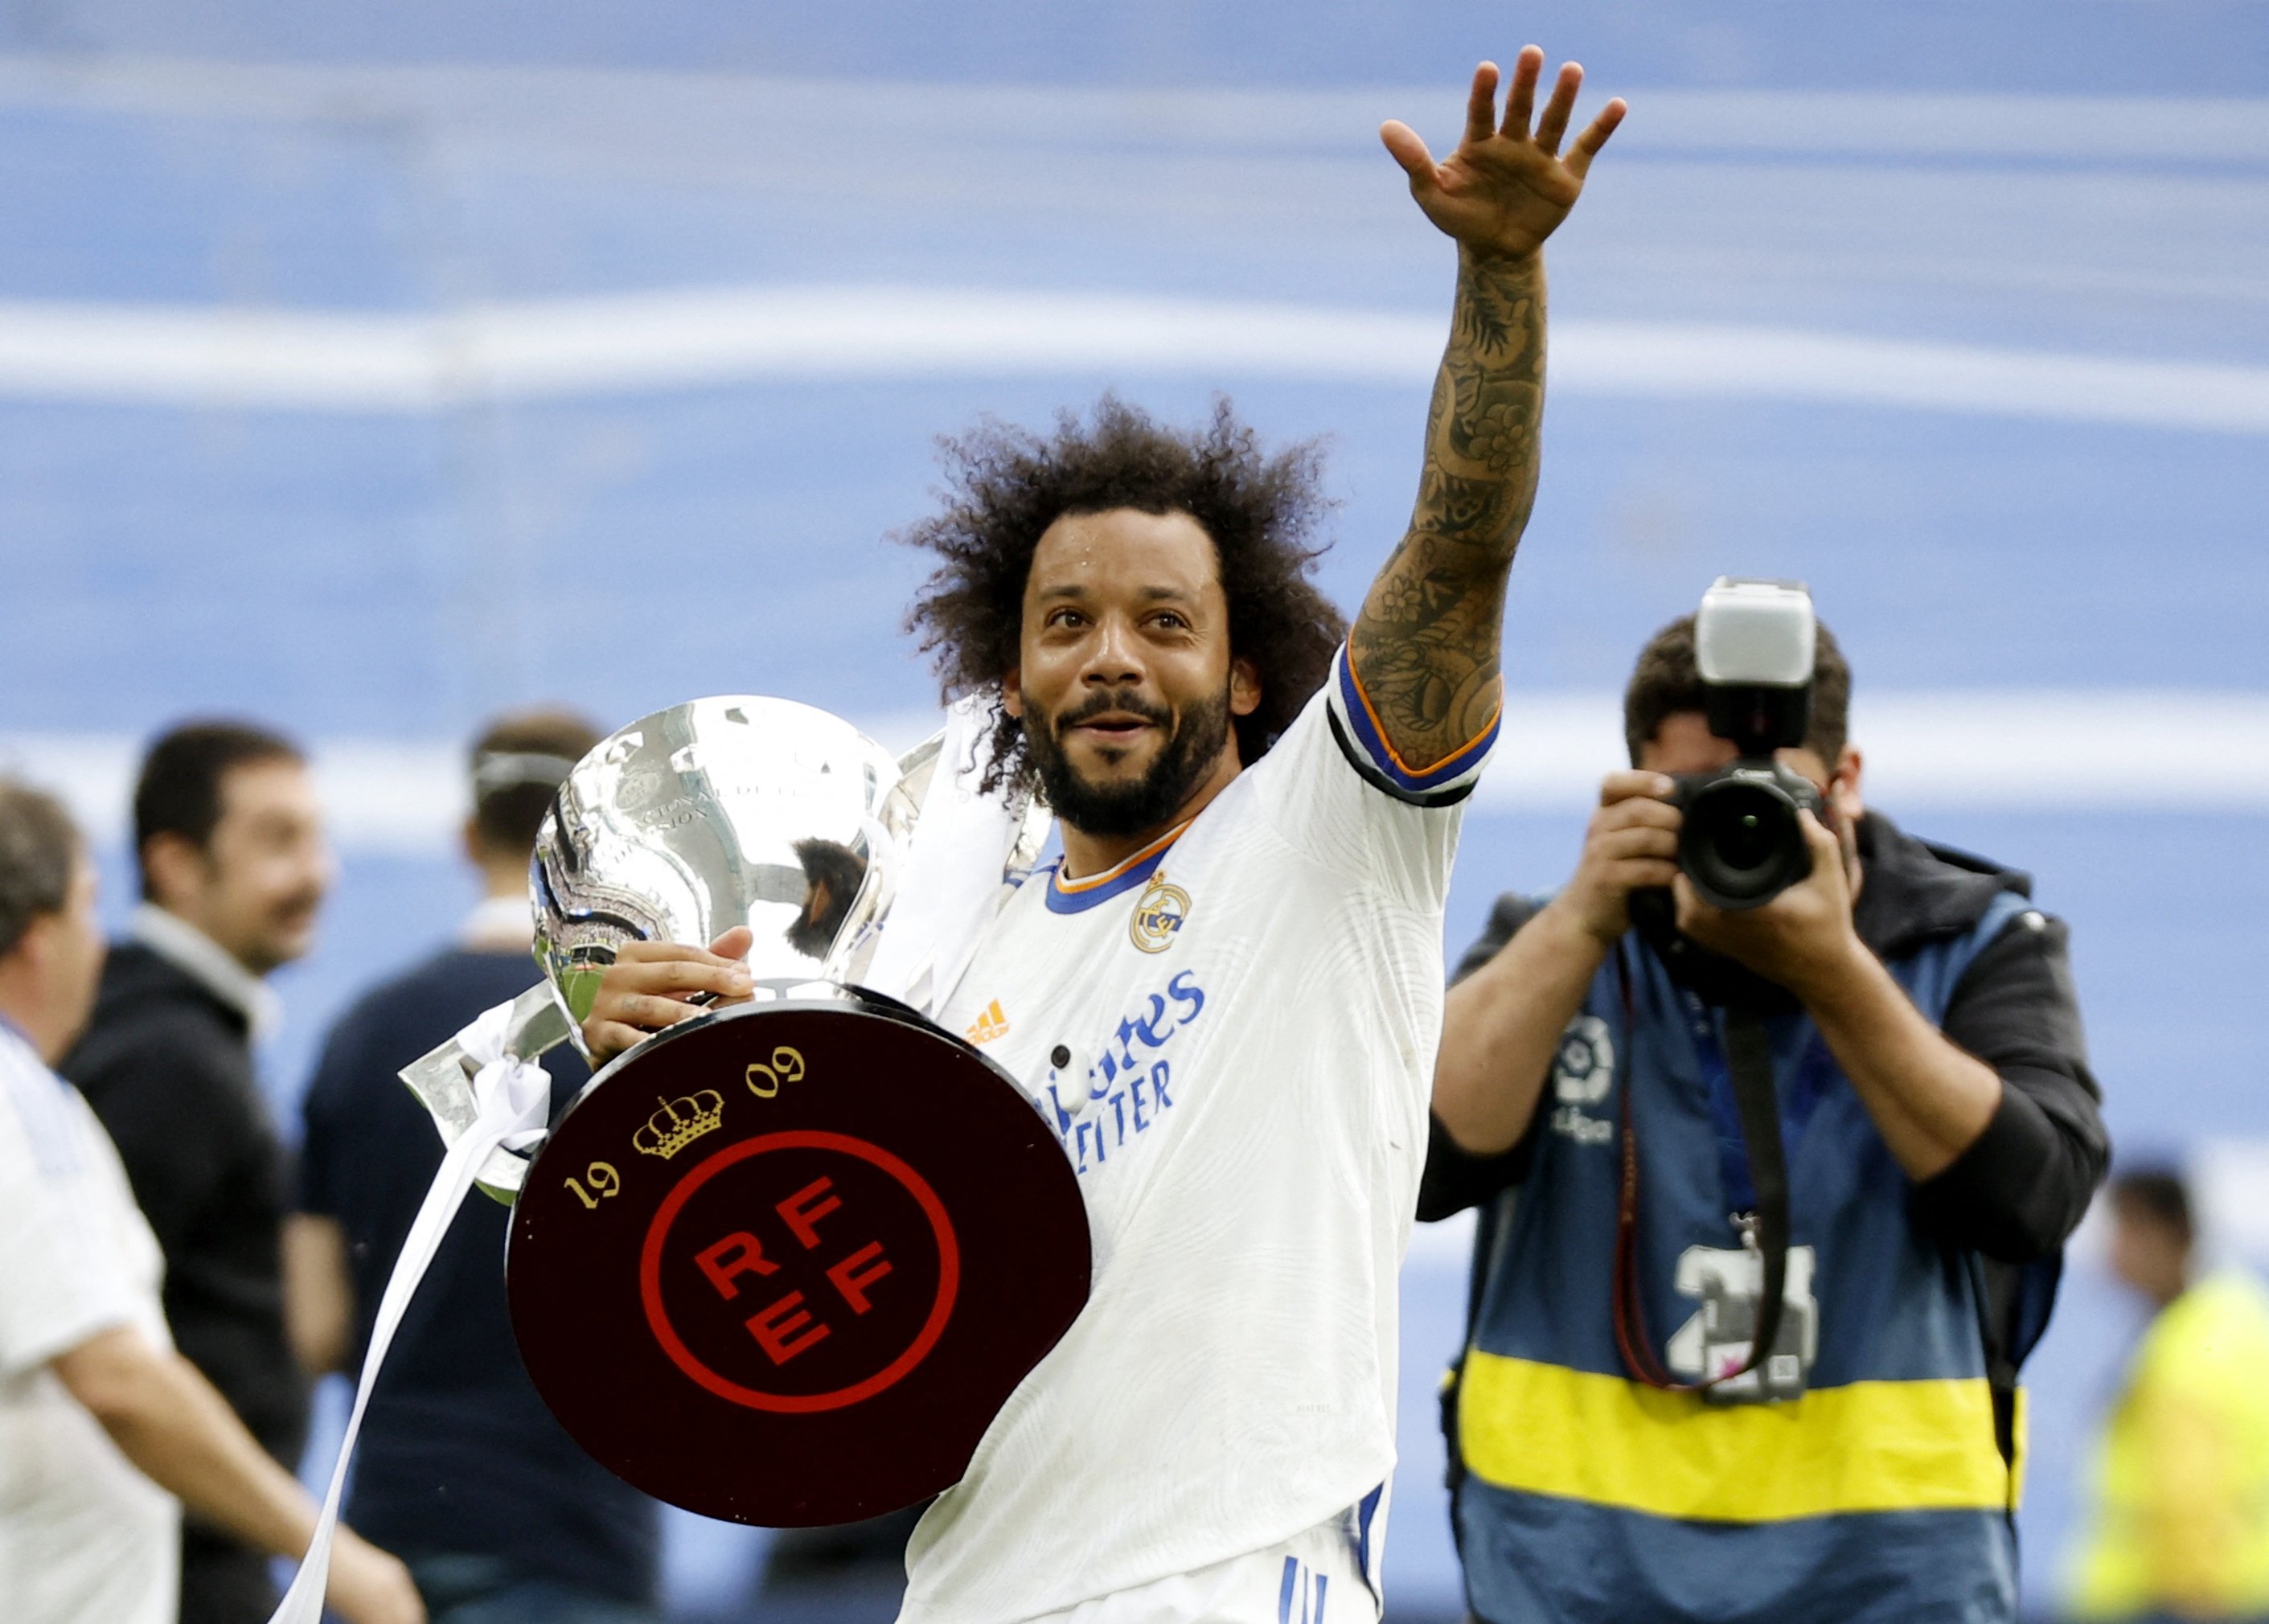 Real Madrid grabs 35th Spanish La Liga title, extends own record